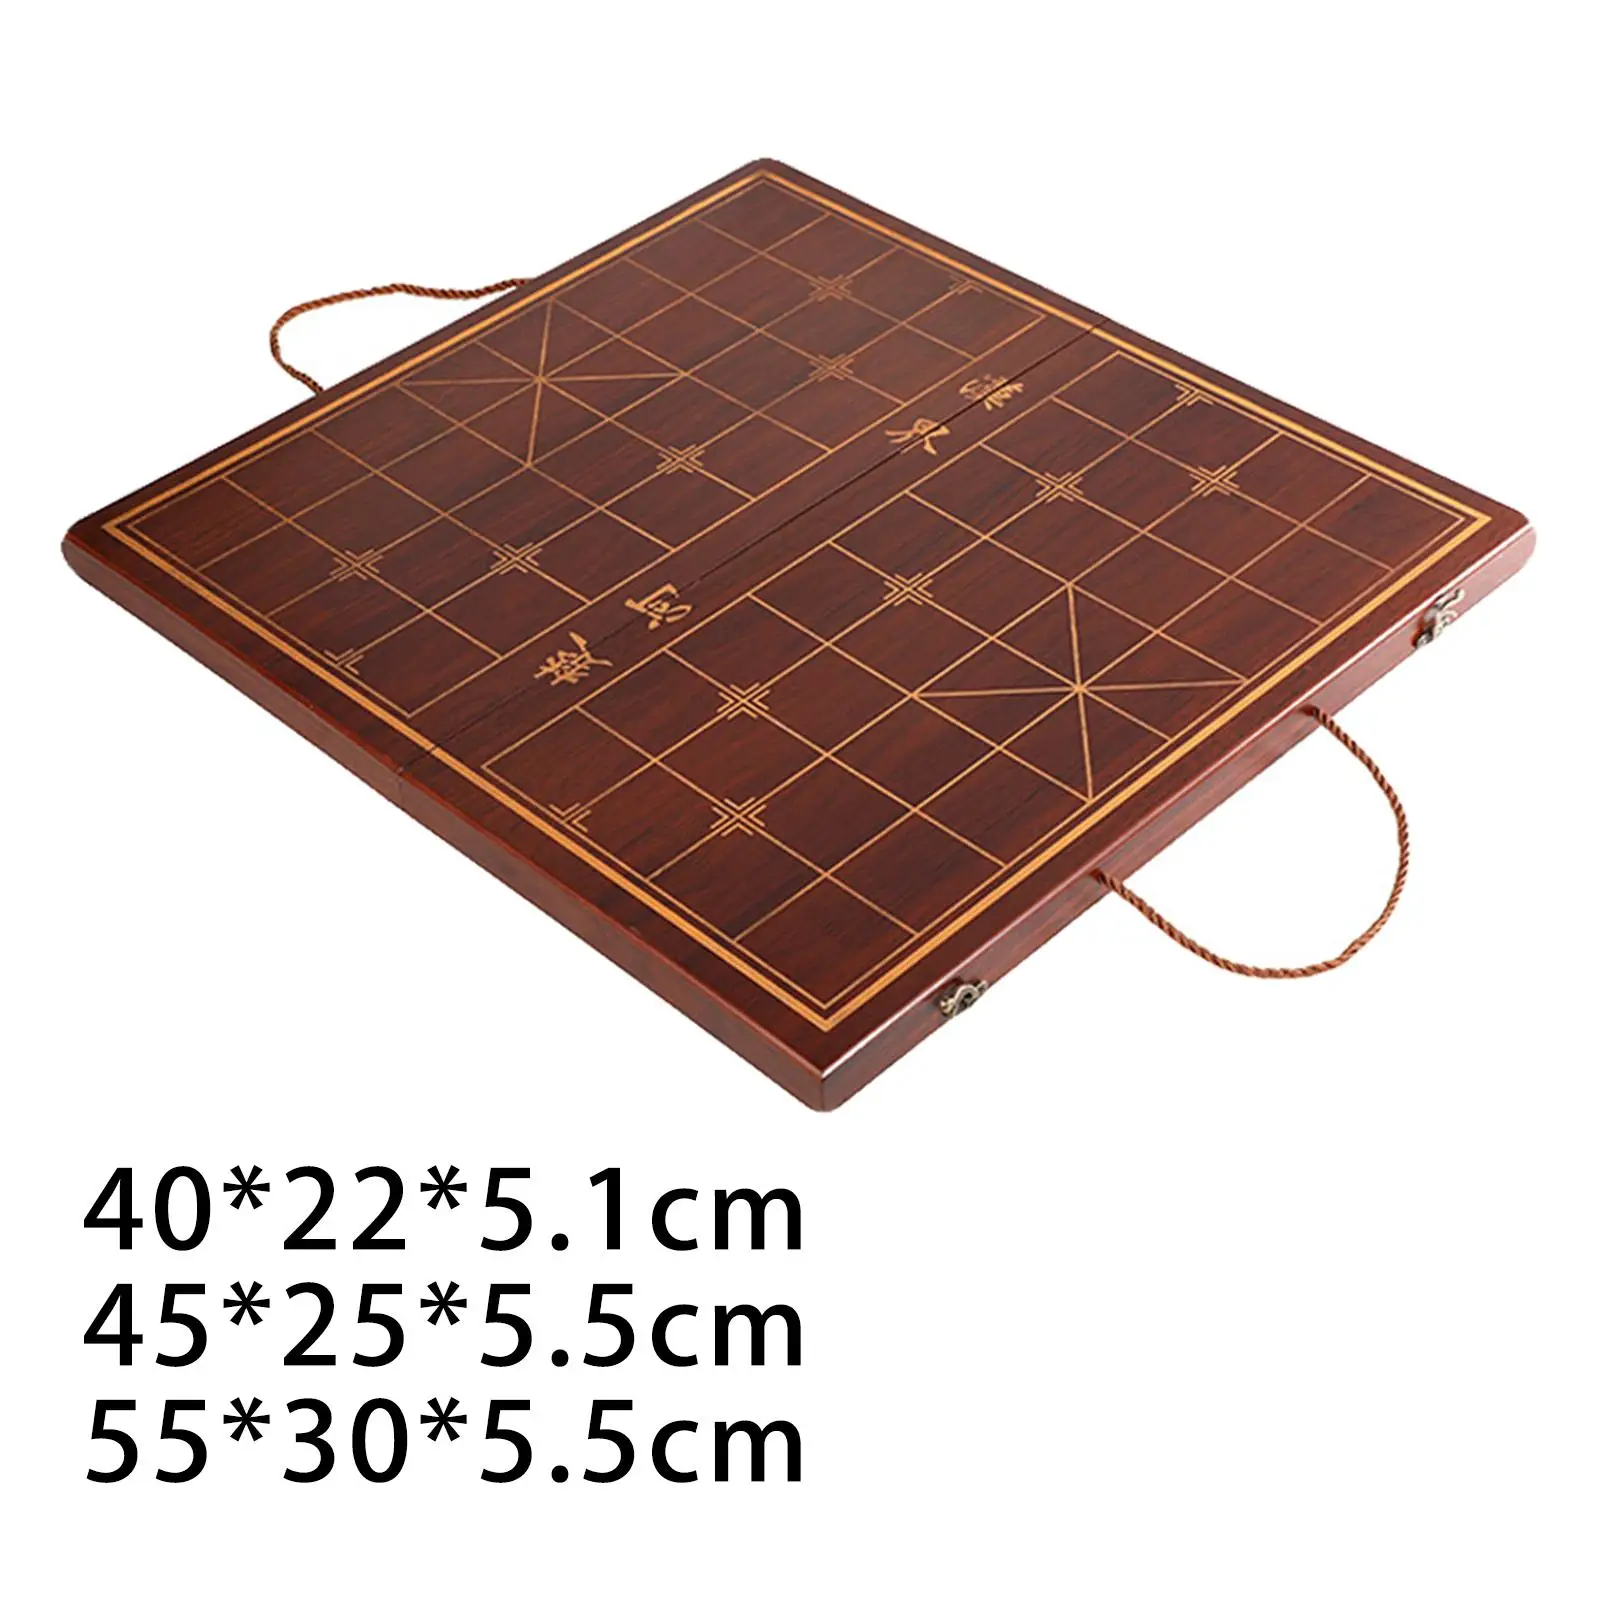 Wooden Chess Board Portable Without Pieces 2 in 1 Chinese Chess Xiangqi Board